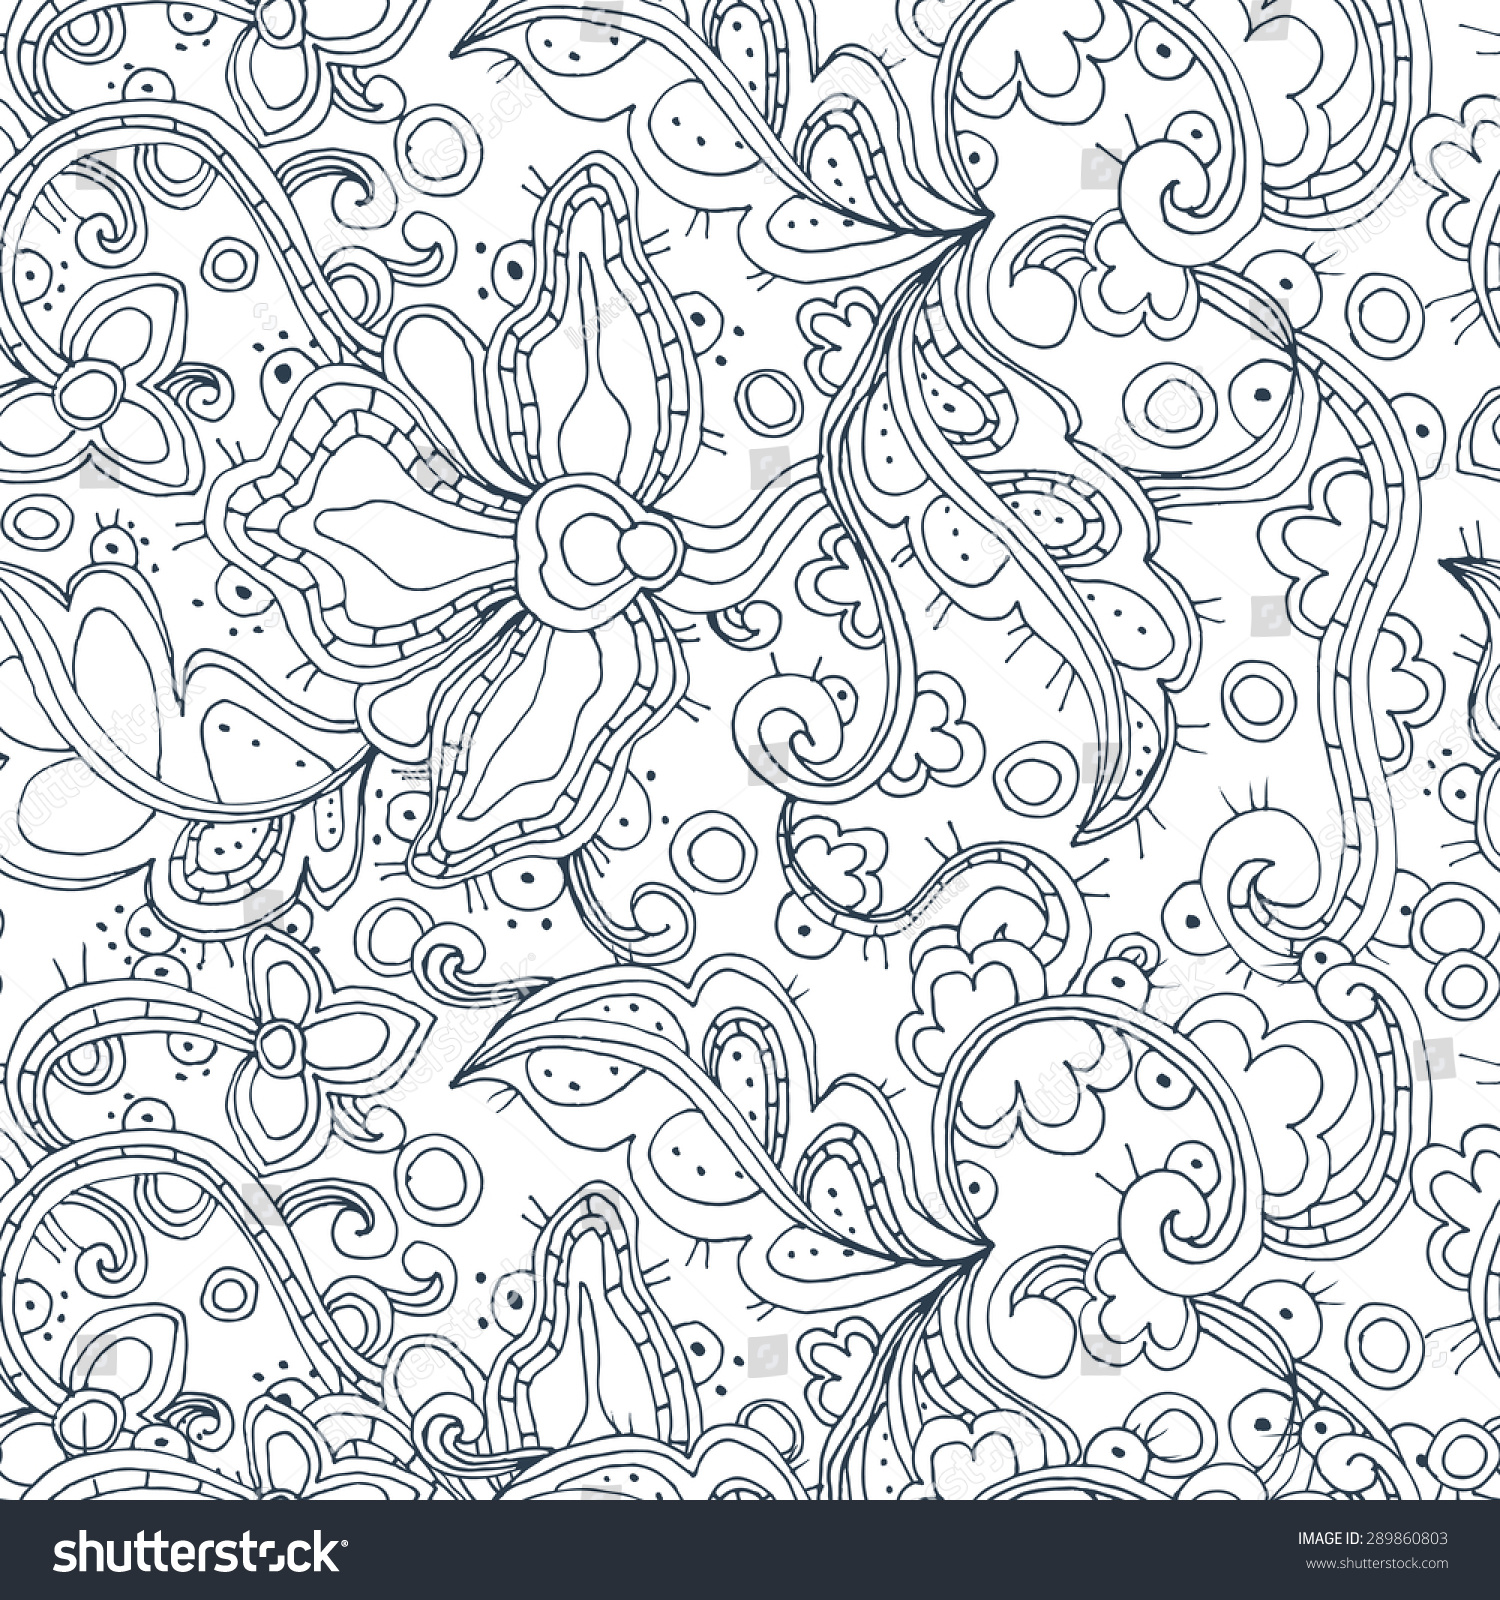 Doodle Seamless Pattern Can Be Used Stock Vector 289860803 - Shutterstock